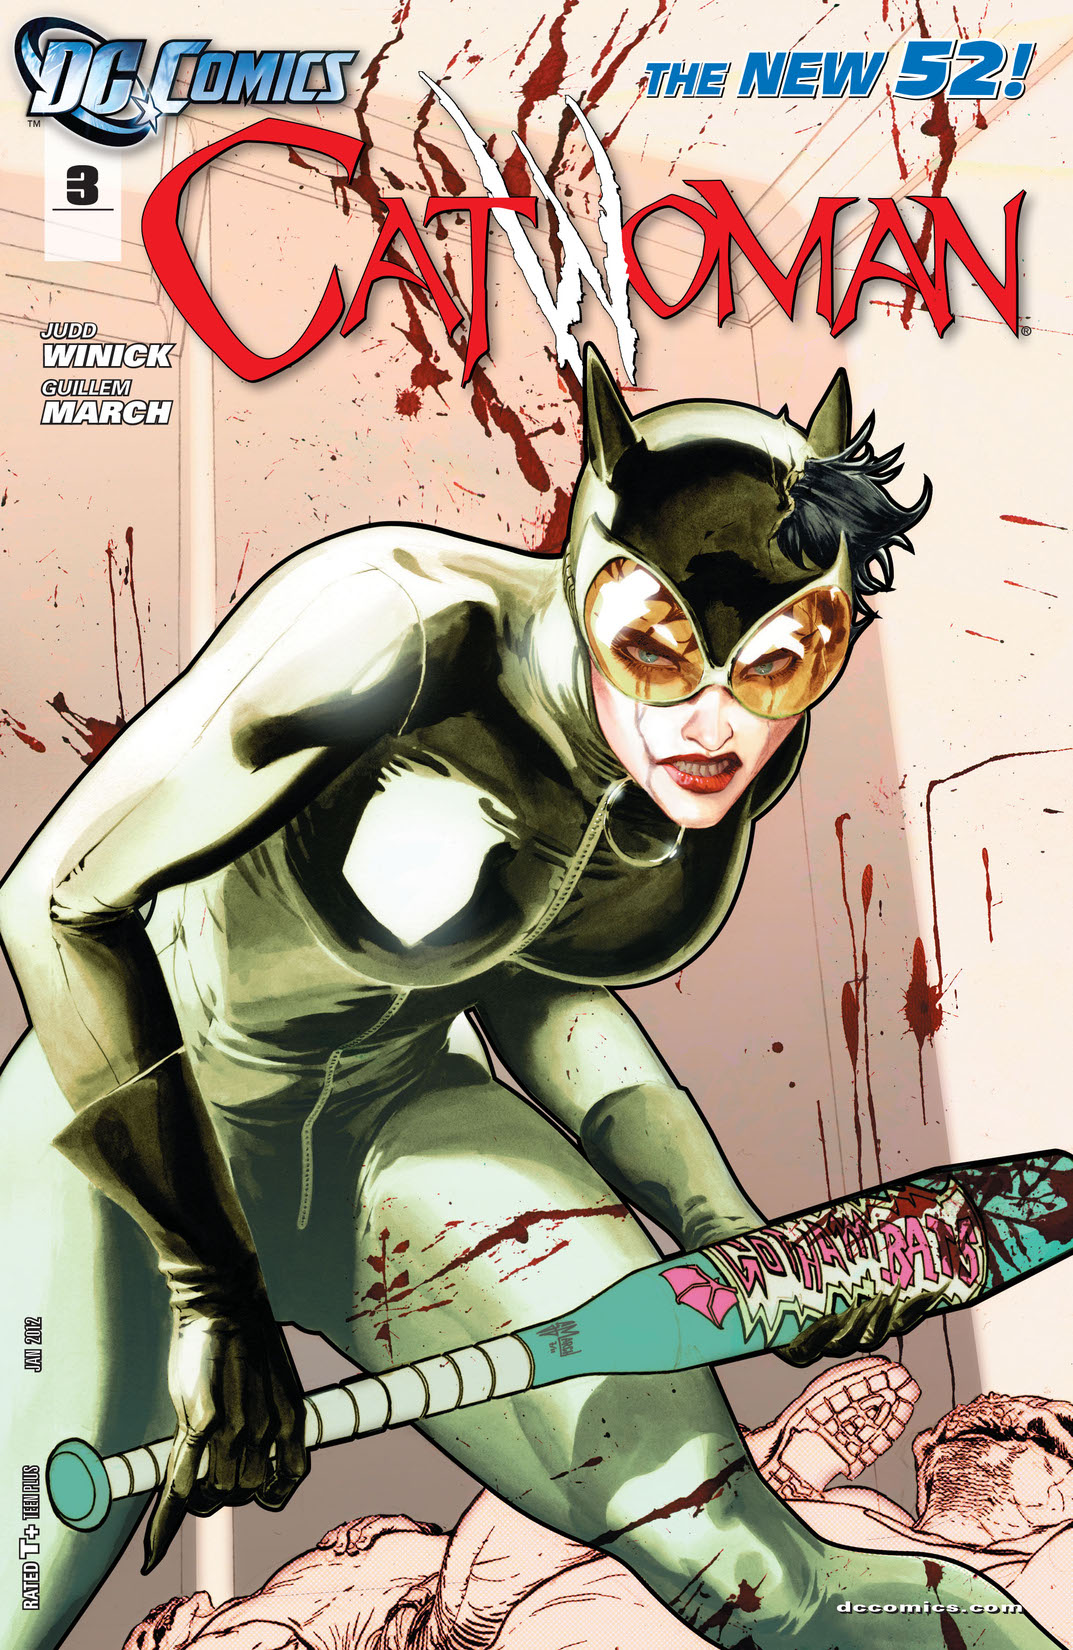 Catwoman (2011-) #3 preview images